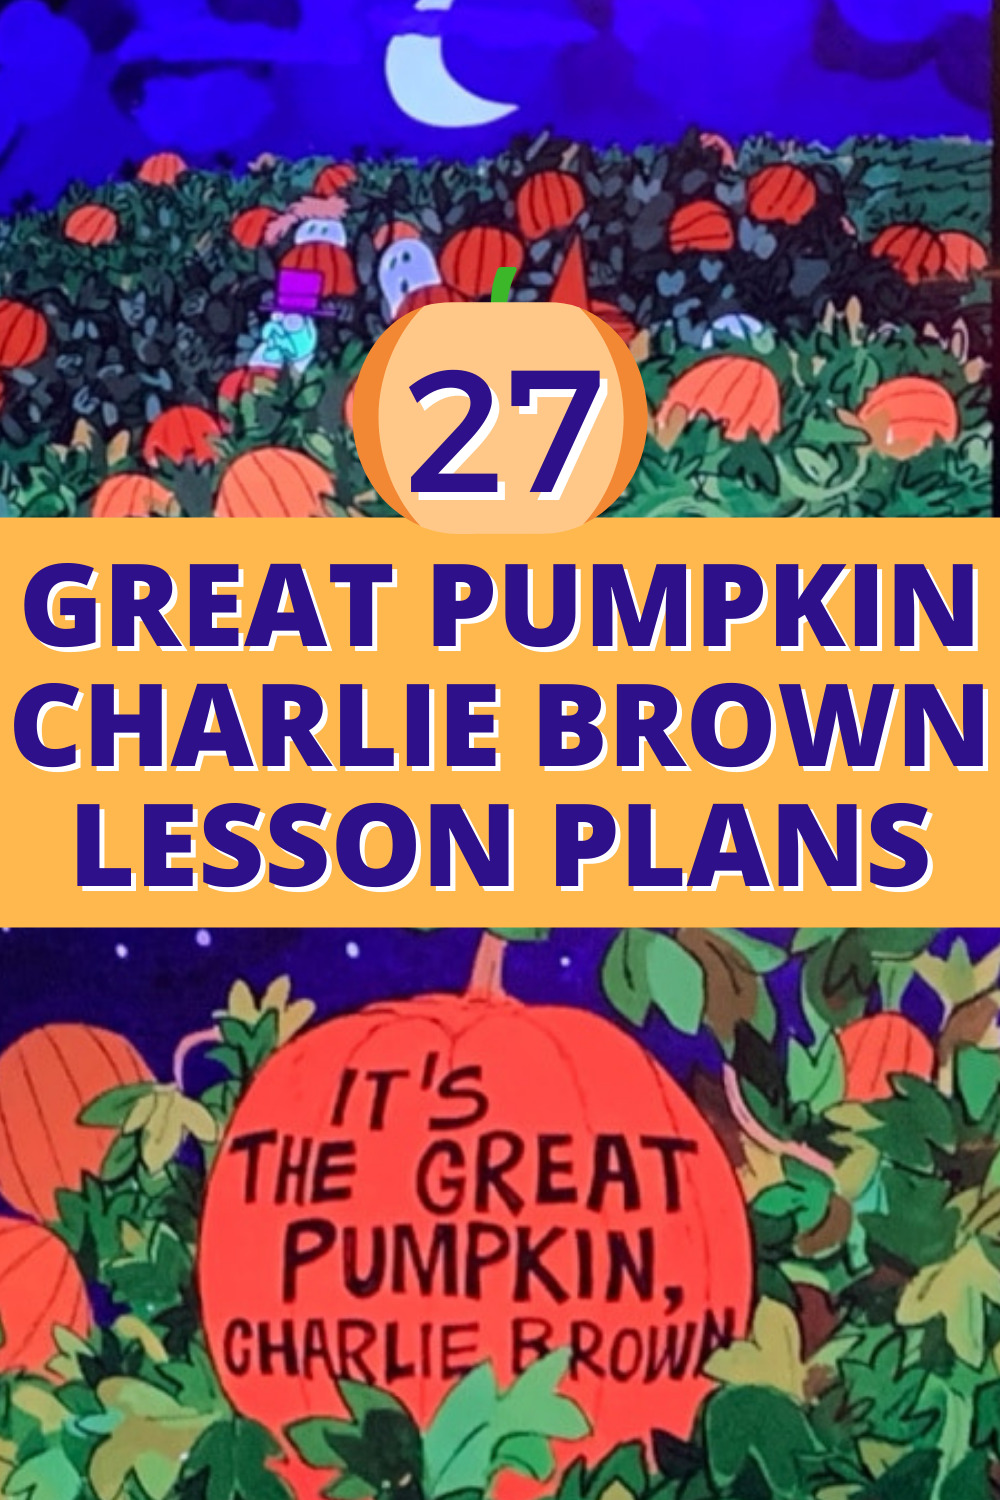 GREAT PUMPKIN CHARLIE BROWN LESSON IDEAS - It's The Great Pumpkin Charlie Brown Cartoon Images with text